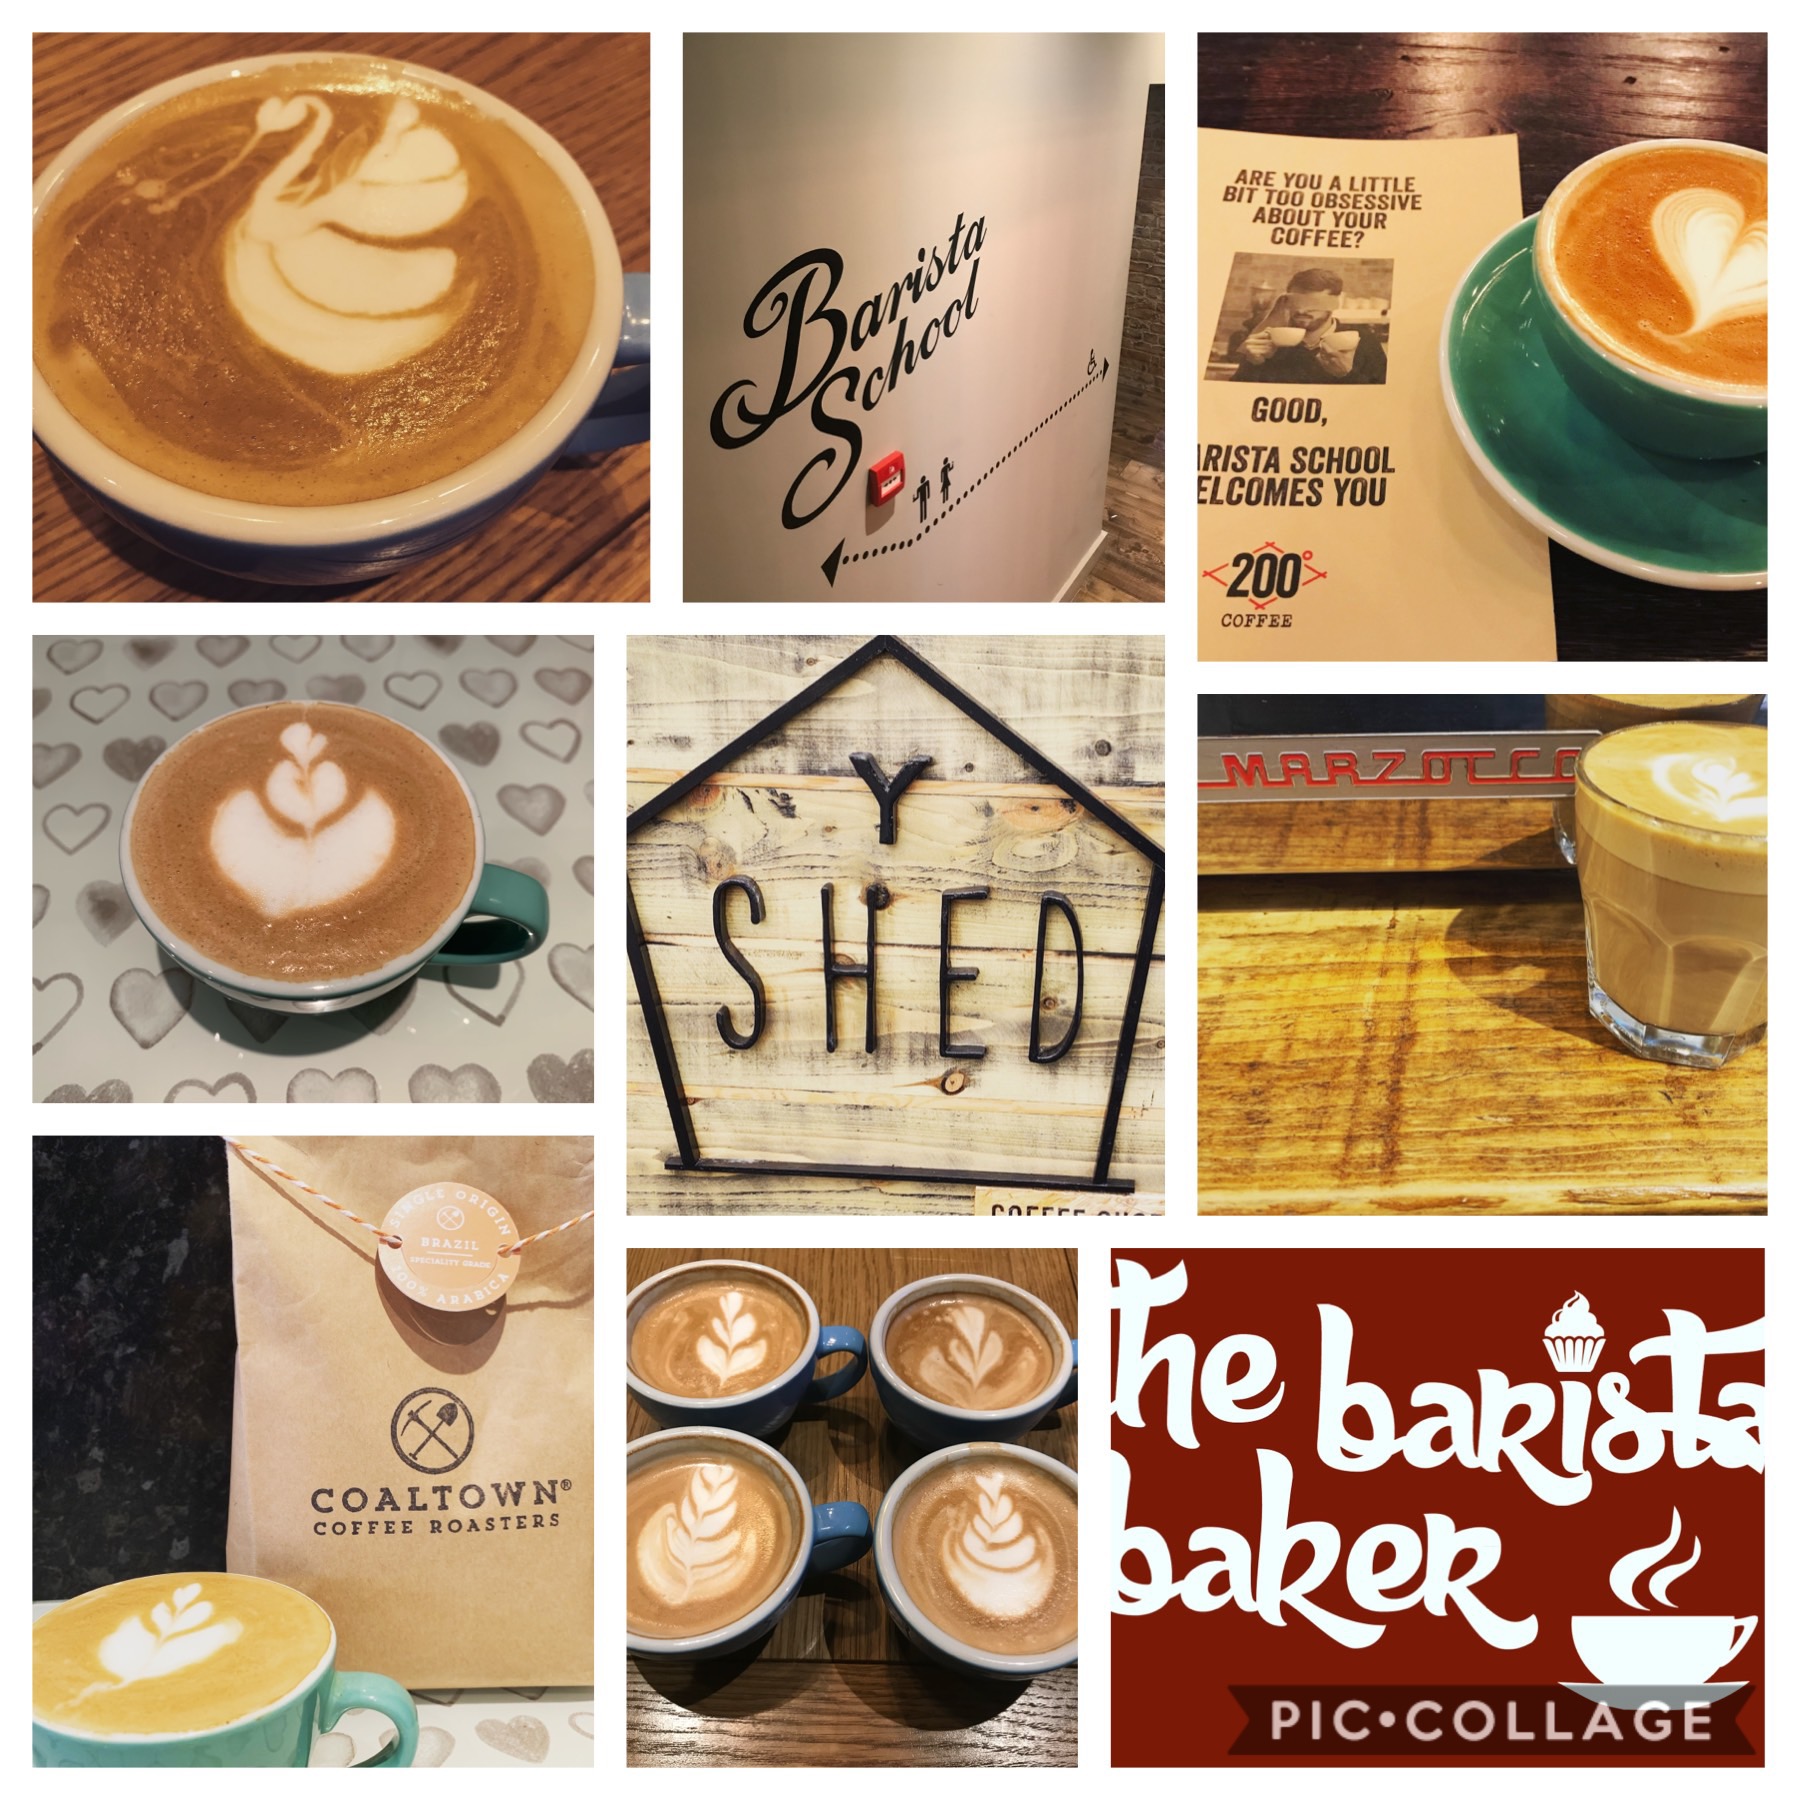 My journey to becoming a Barista